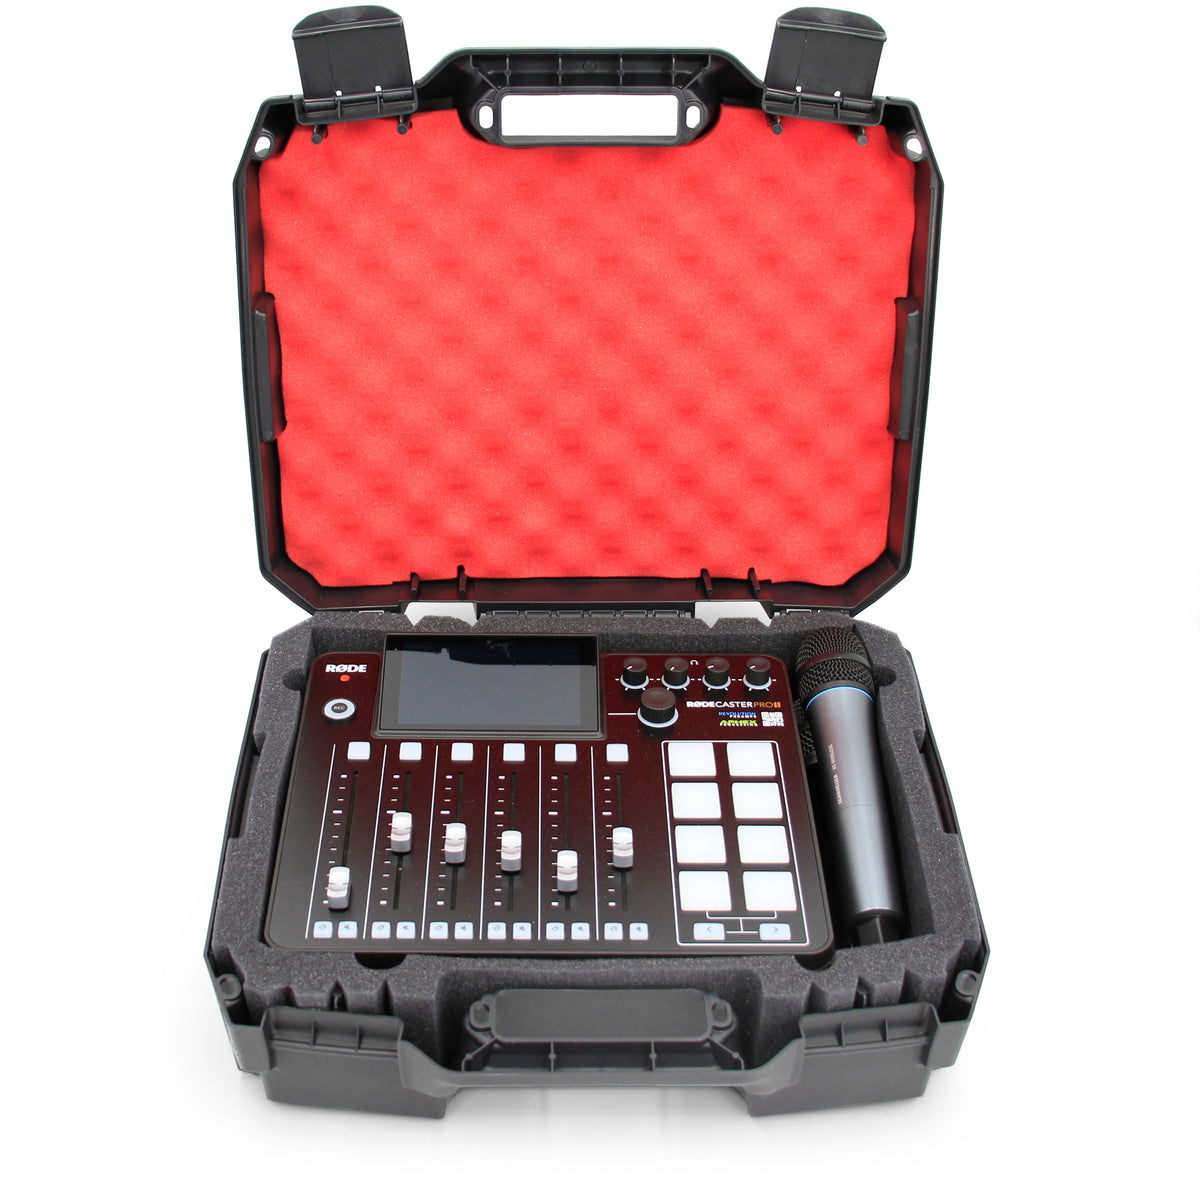 RODECaster Pro 2 Case - Case Club